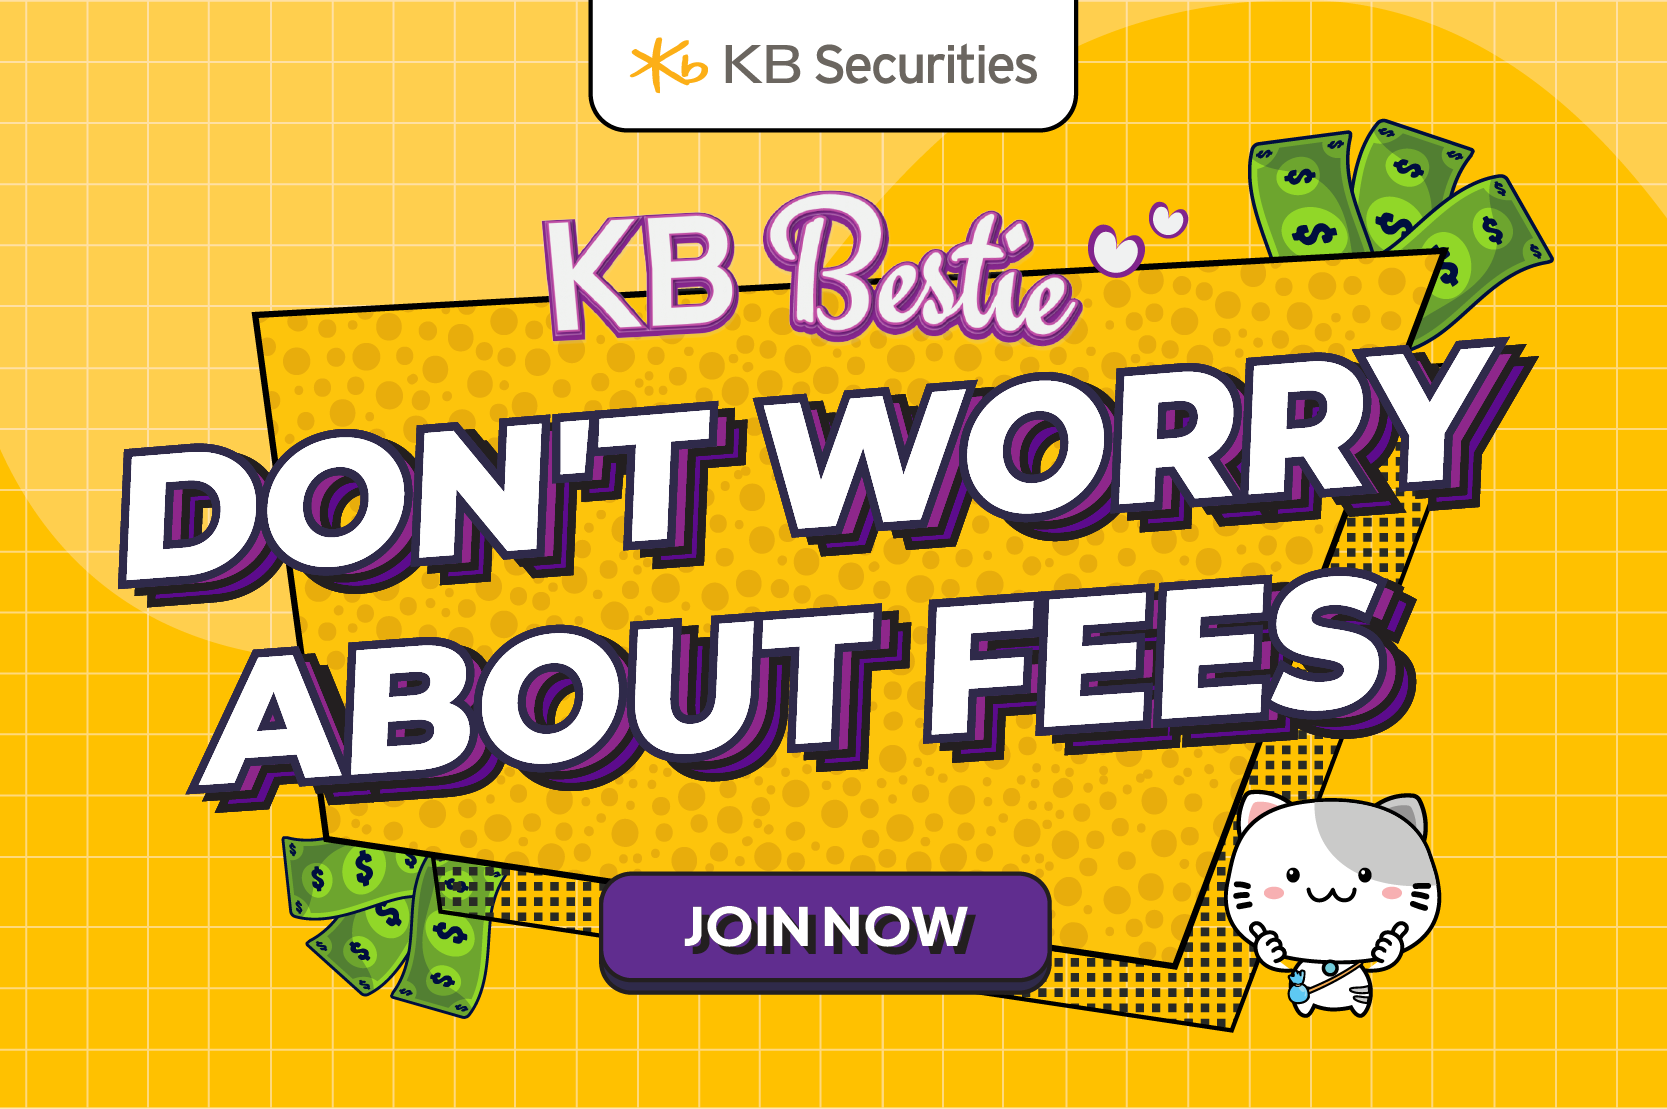 Free transaction with KB Bestie